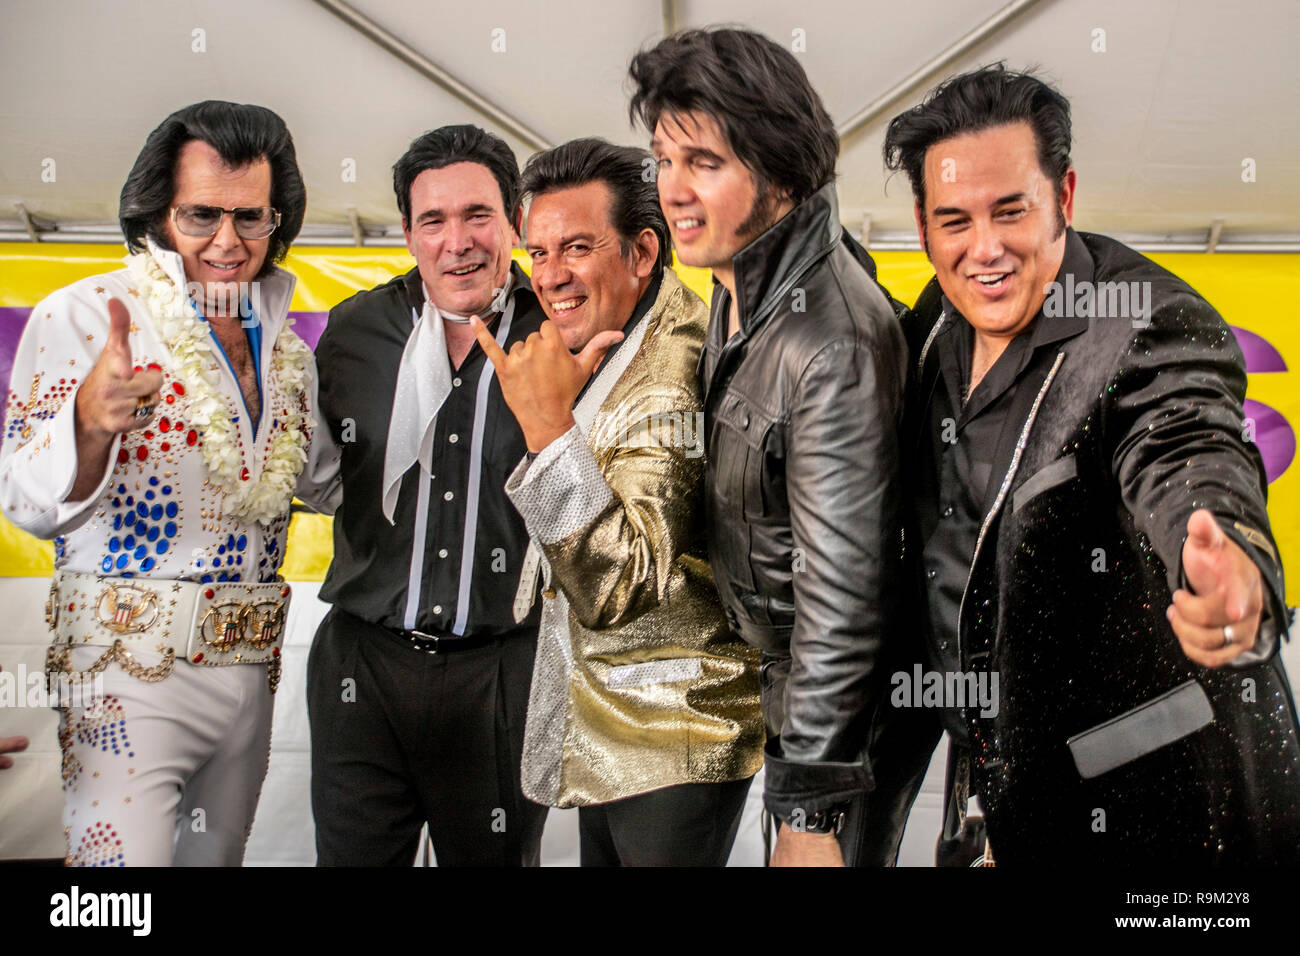 Five costumed Elvis Presley impersonators line up on the stage of a music festival in Fullerton, CA. Stock Photo